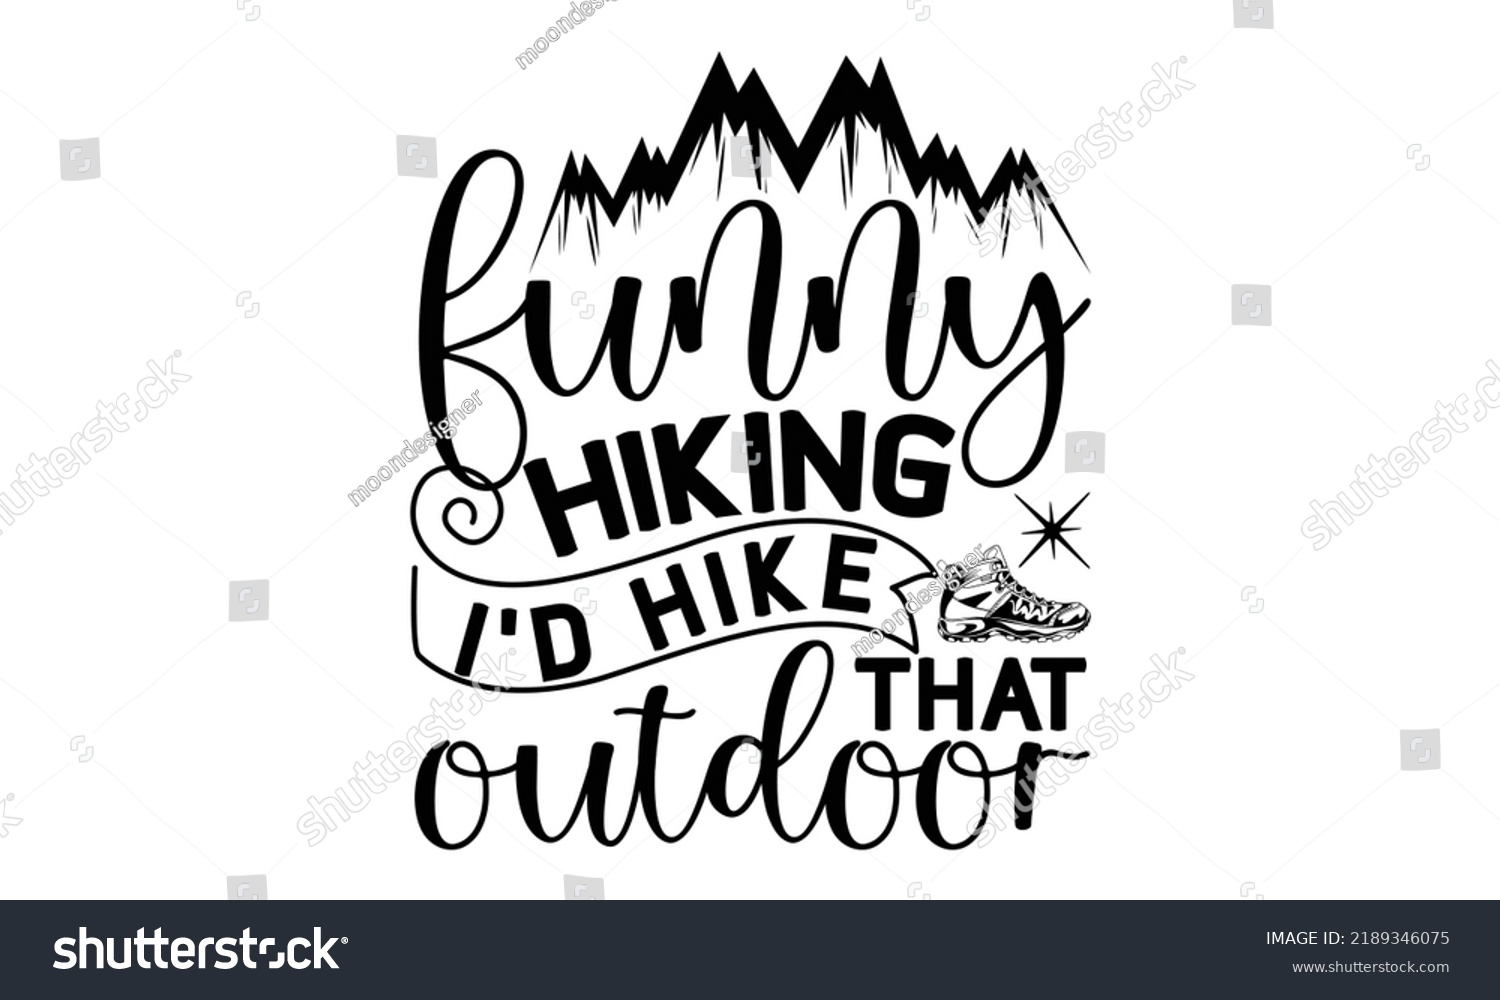 SVG of Funny Hiking I’d Hike That Outdoor -Hiking t shirt design, Hand drawn lettering phrase, Calligraphy graphic design, SVG Files for Cutting Cricut and Silhouette,  Hand written vector sign, EPS svg